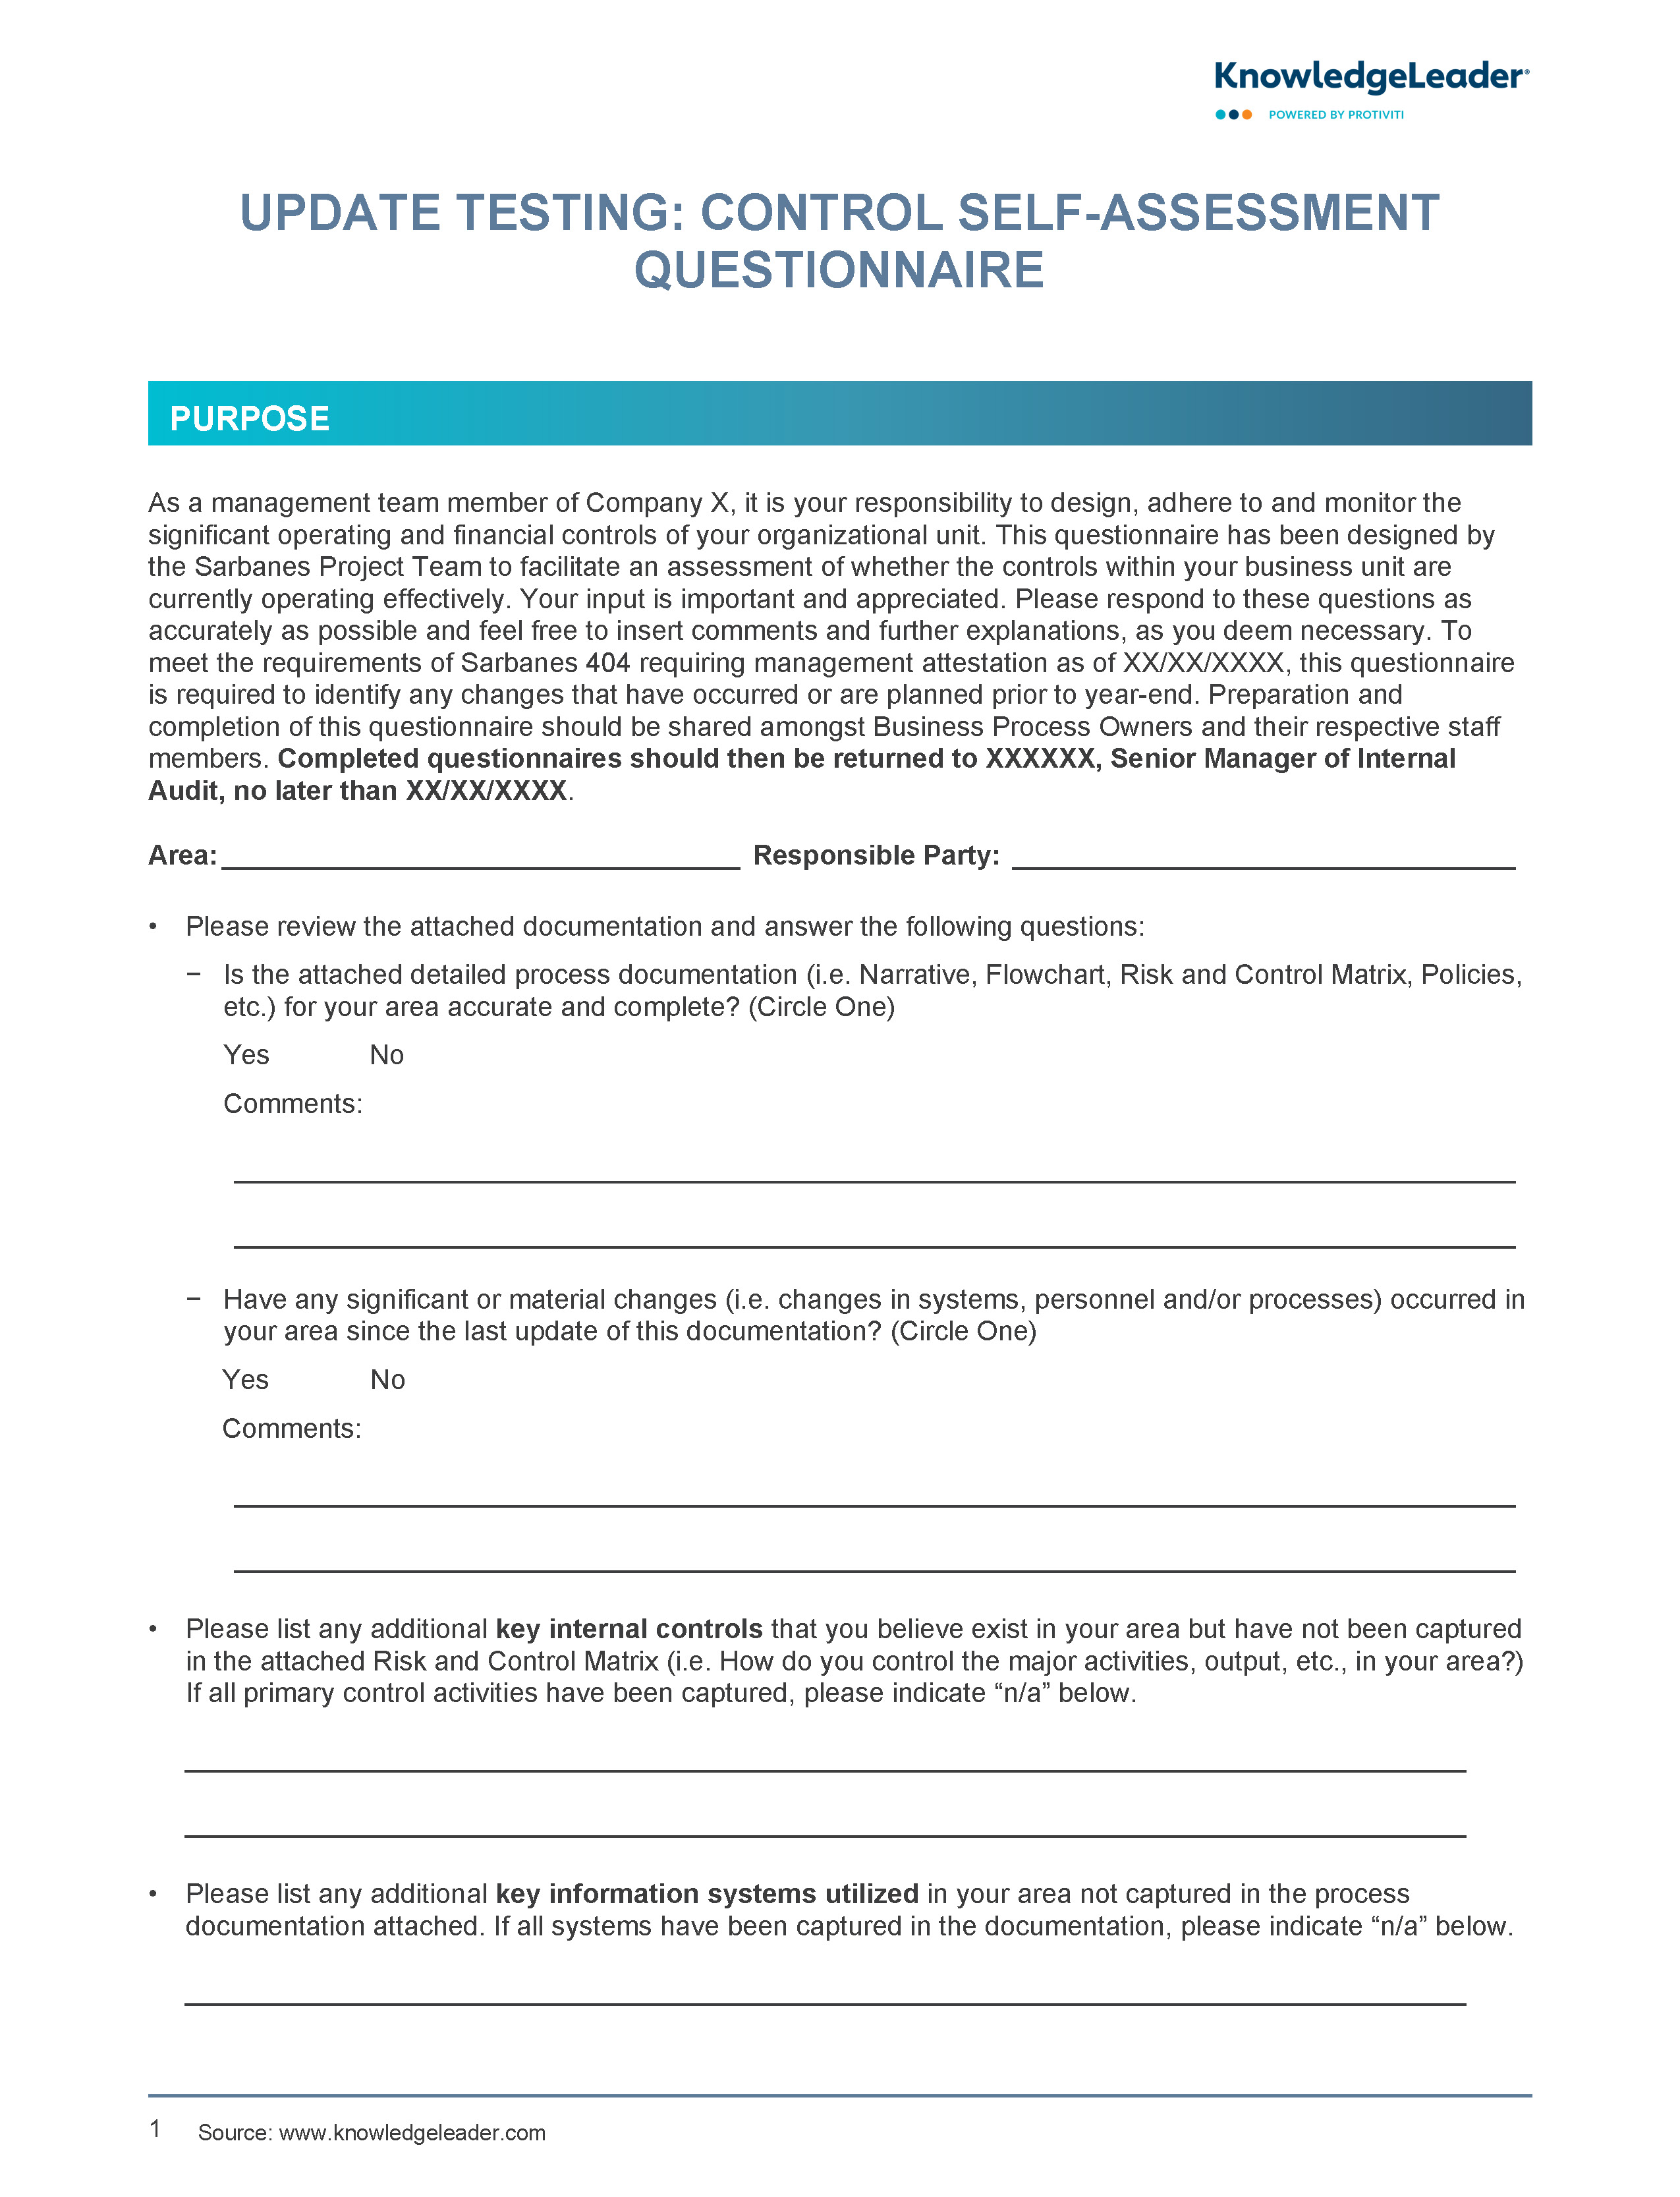 Screenshot of the first page of Update Testing – Control Self Assessment Questionnaire